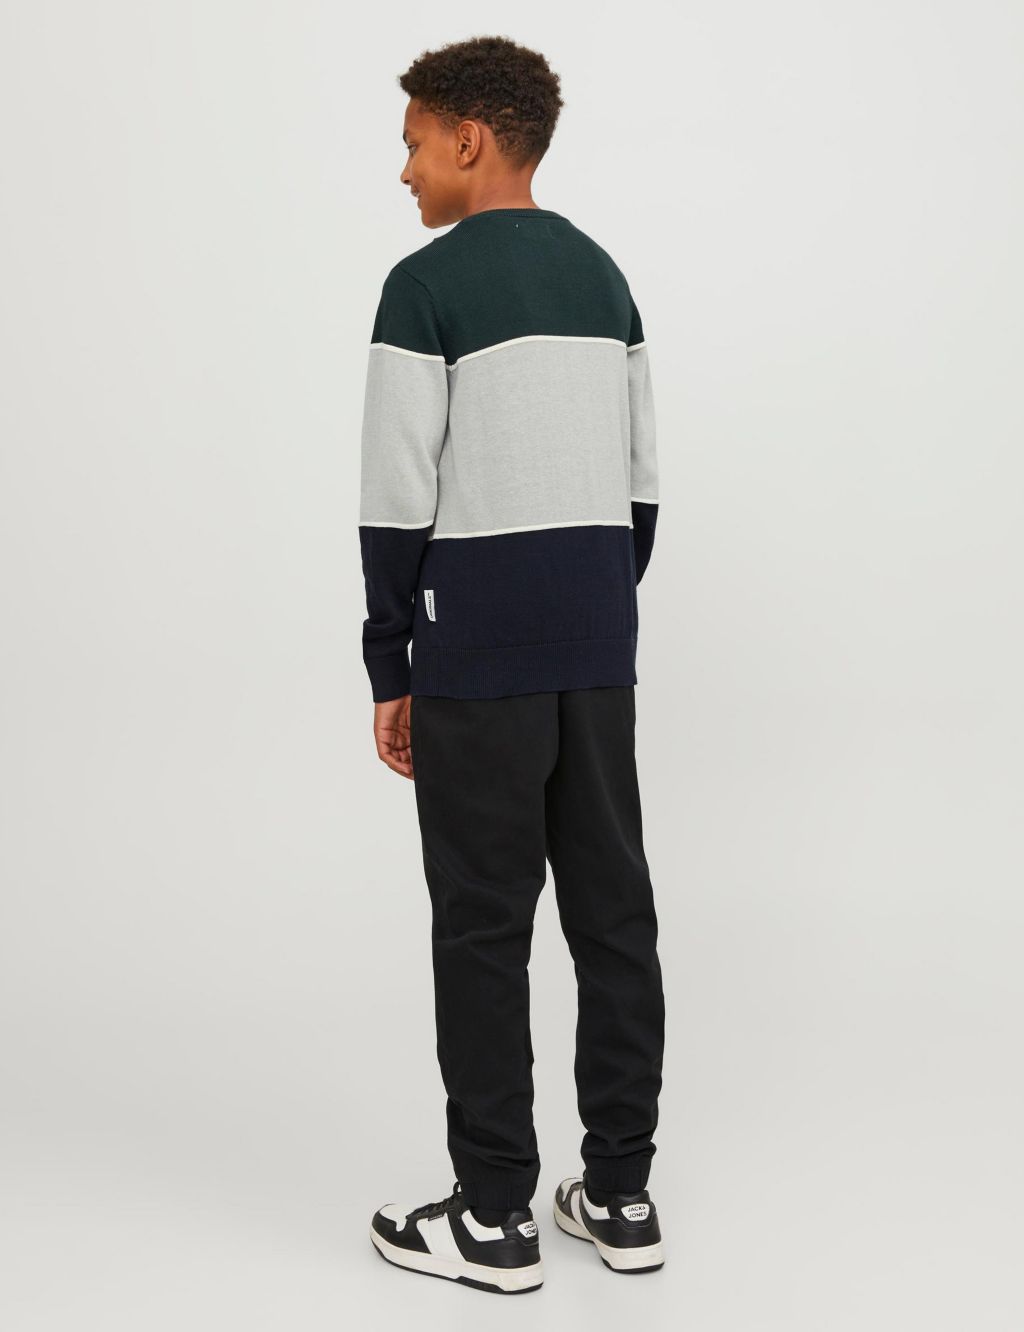 Cotton Blend Colour Block Knitted Jumper (8-16 Yrs) image 5